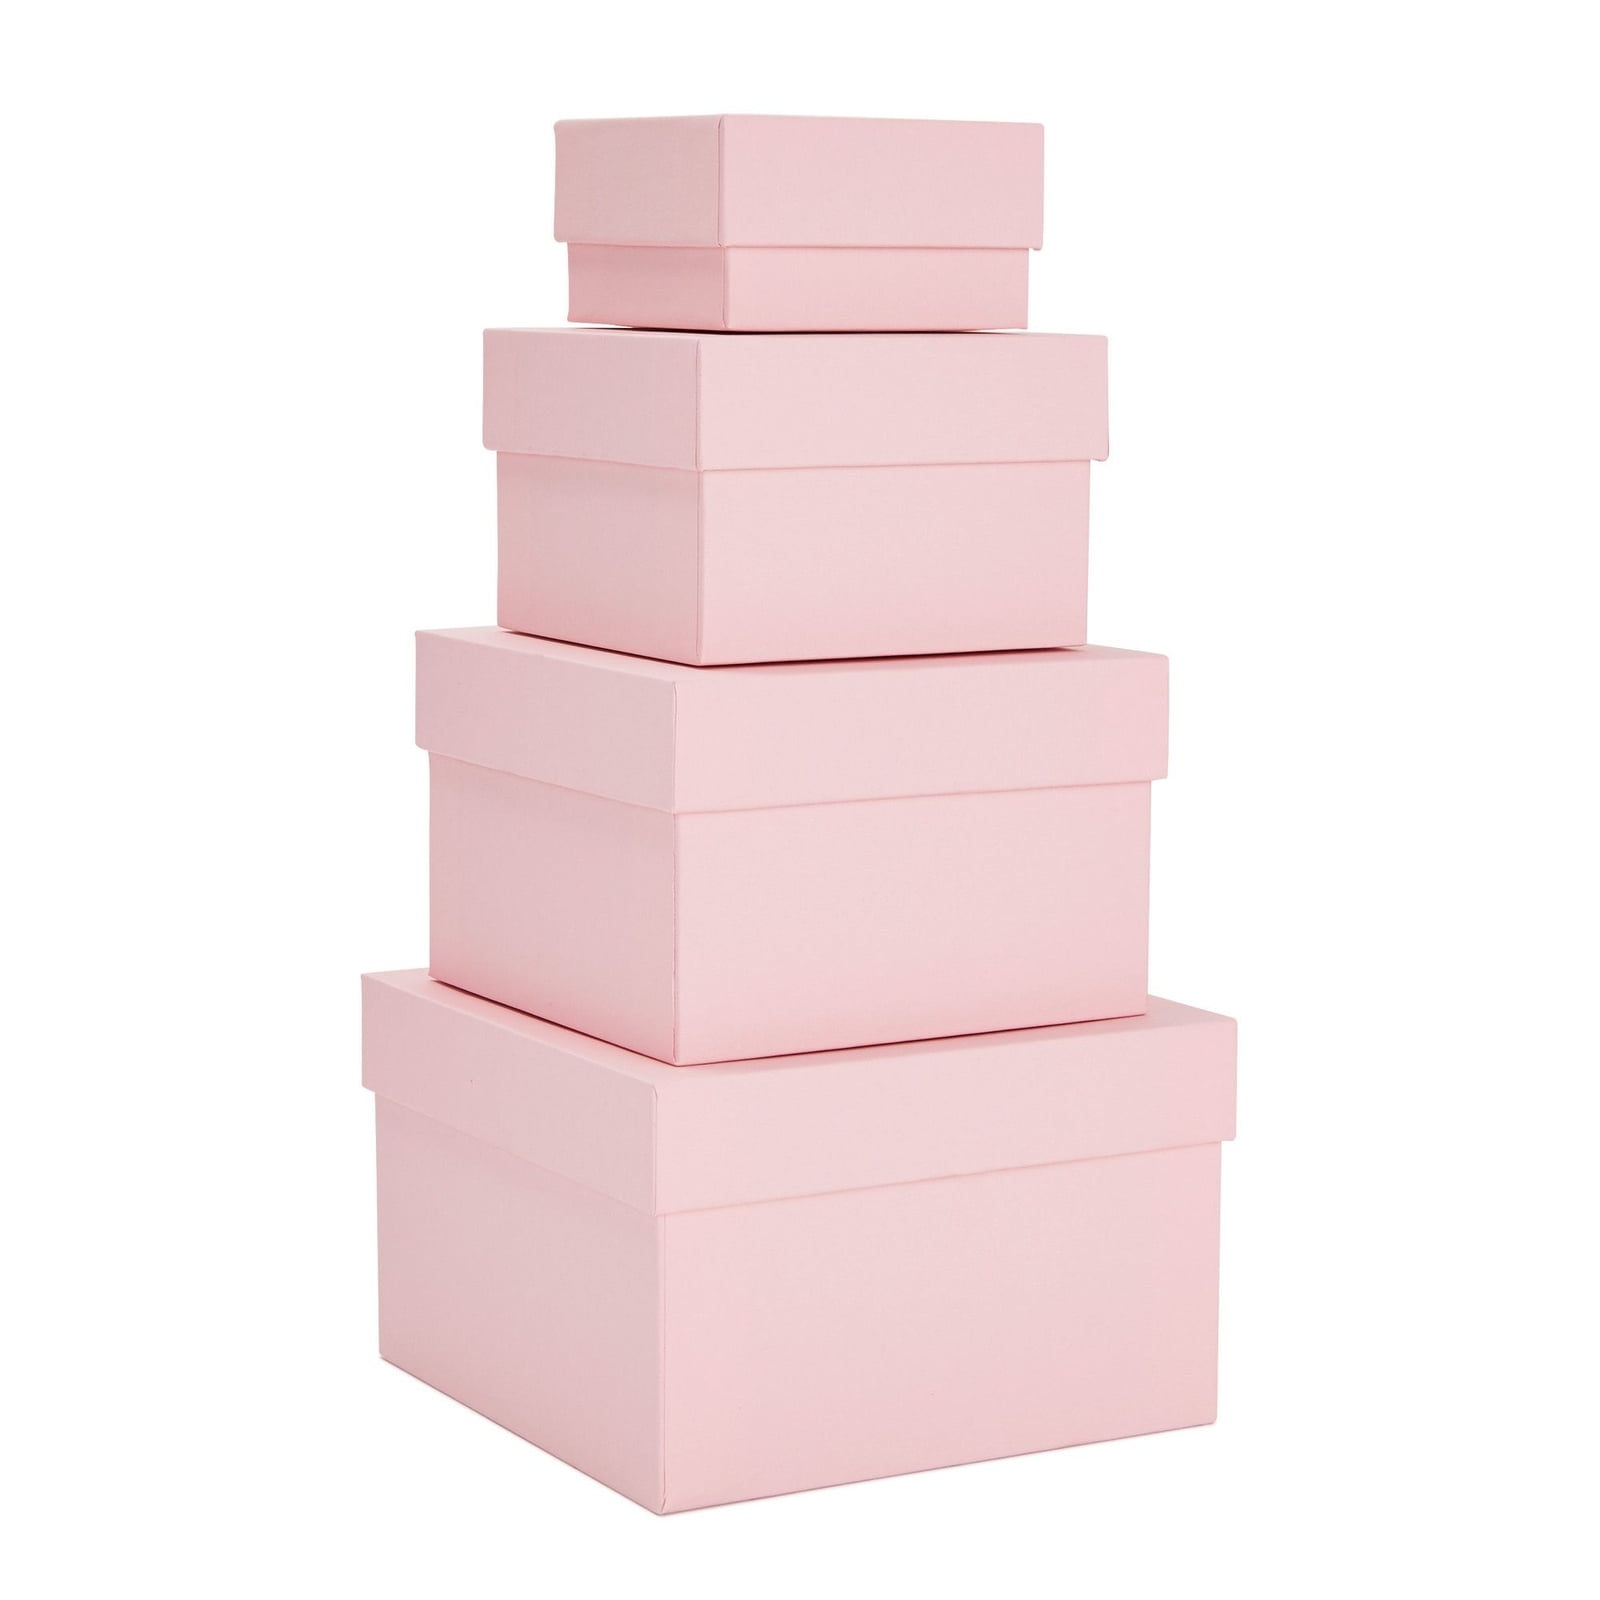 4 Pack Square Nesting Gift Boxes, Decorative Boxes with Lids in 4 ...